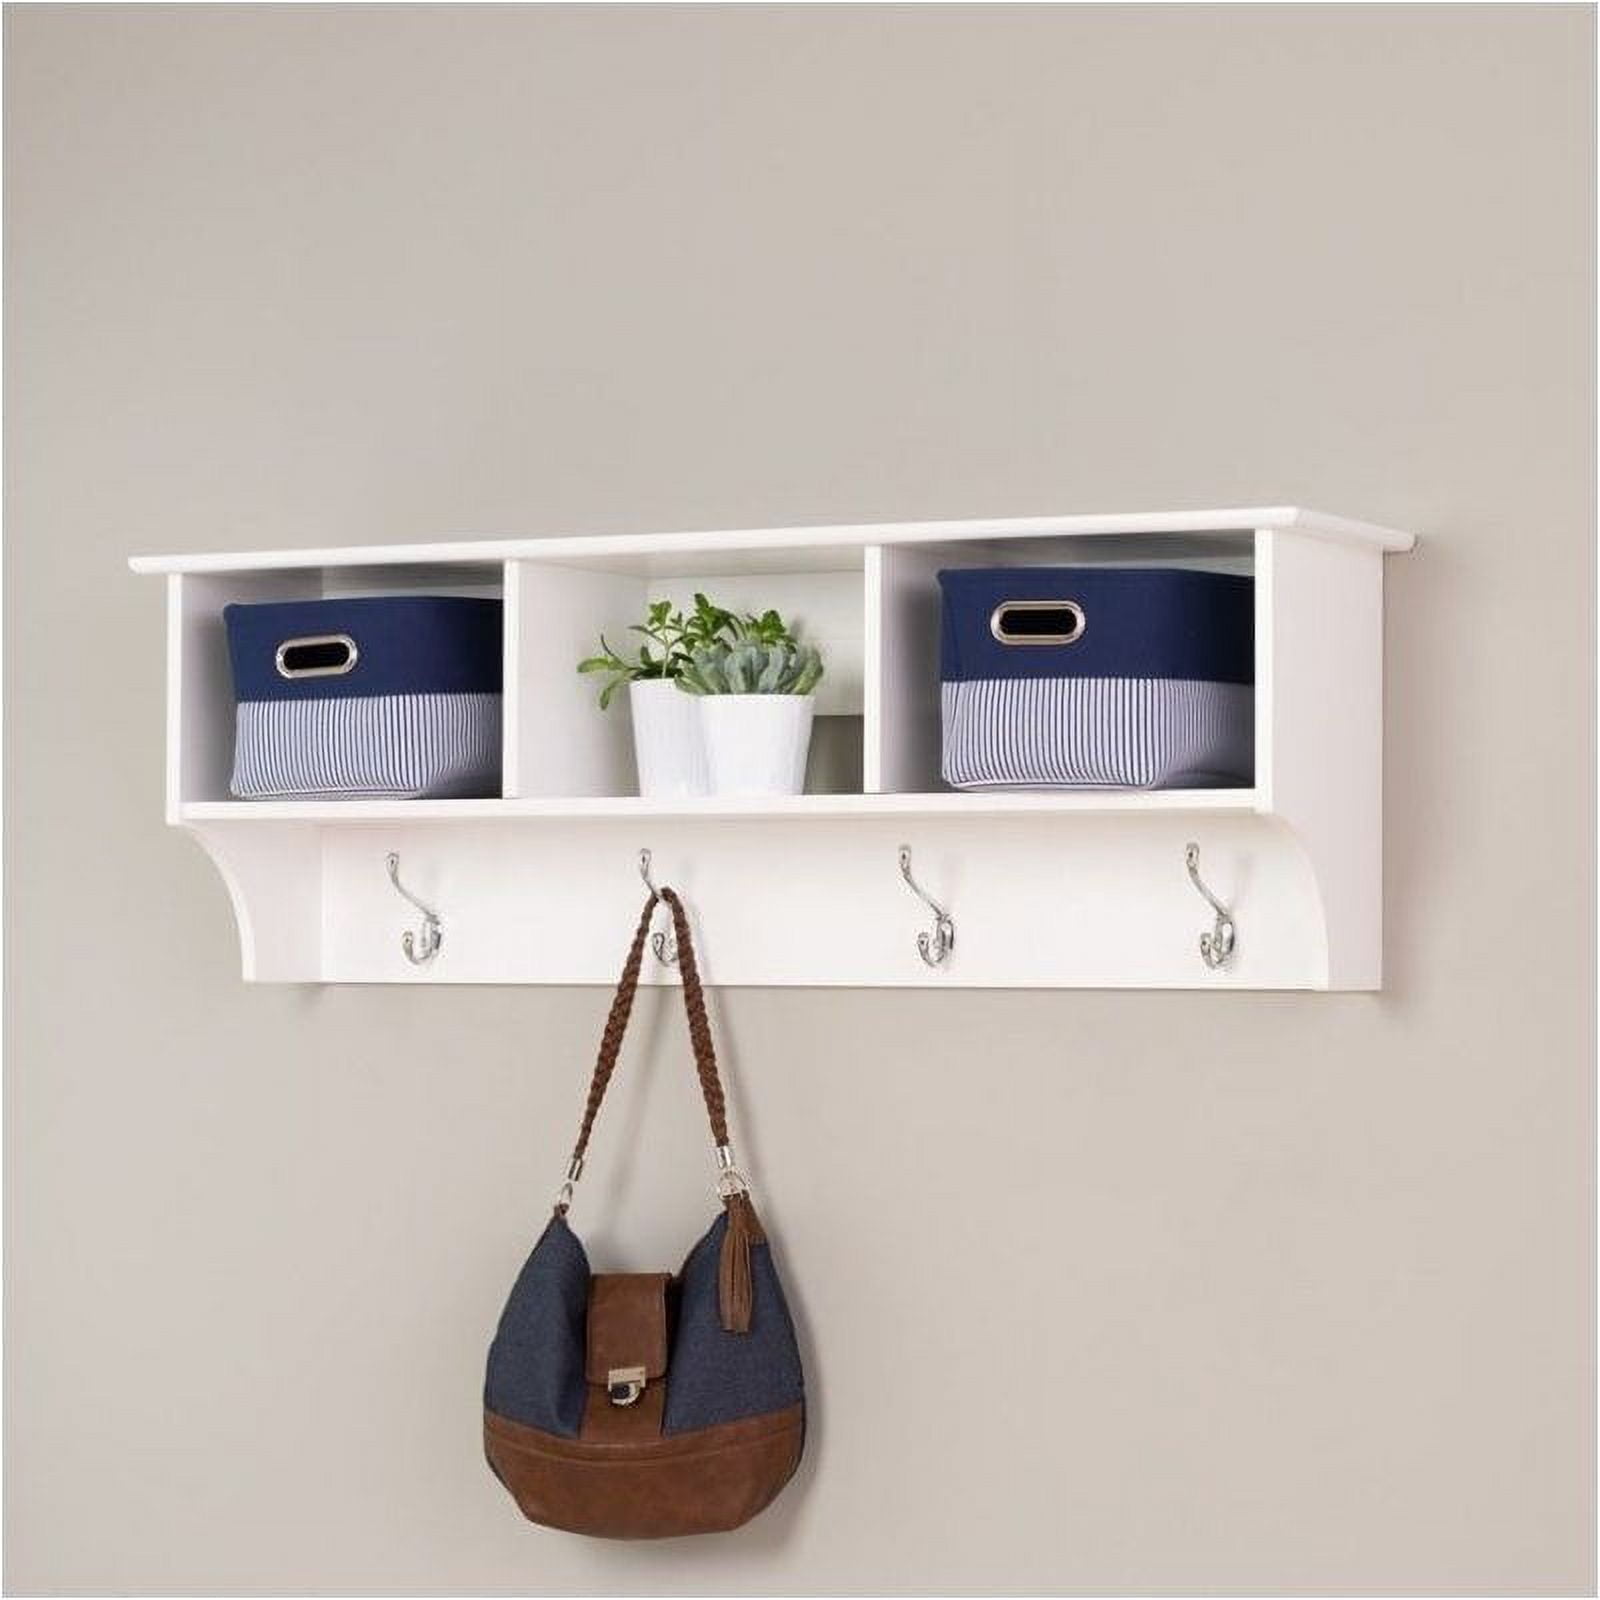 Wall Cubby Storage Unit Coat Rack Shelf with 3 Cubby Holes For